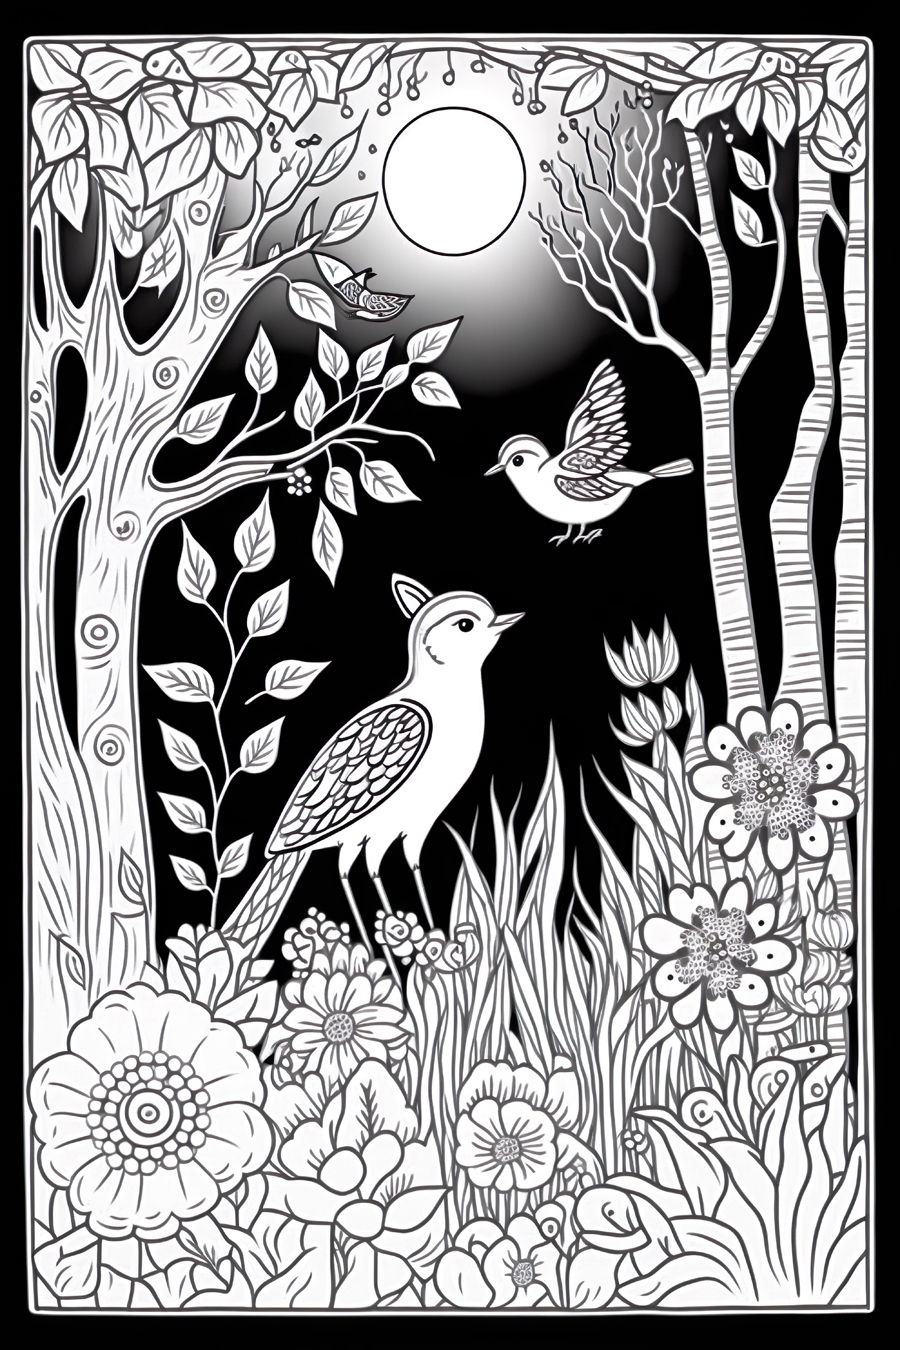 A black and white drawing of birds in a forest.